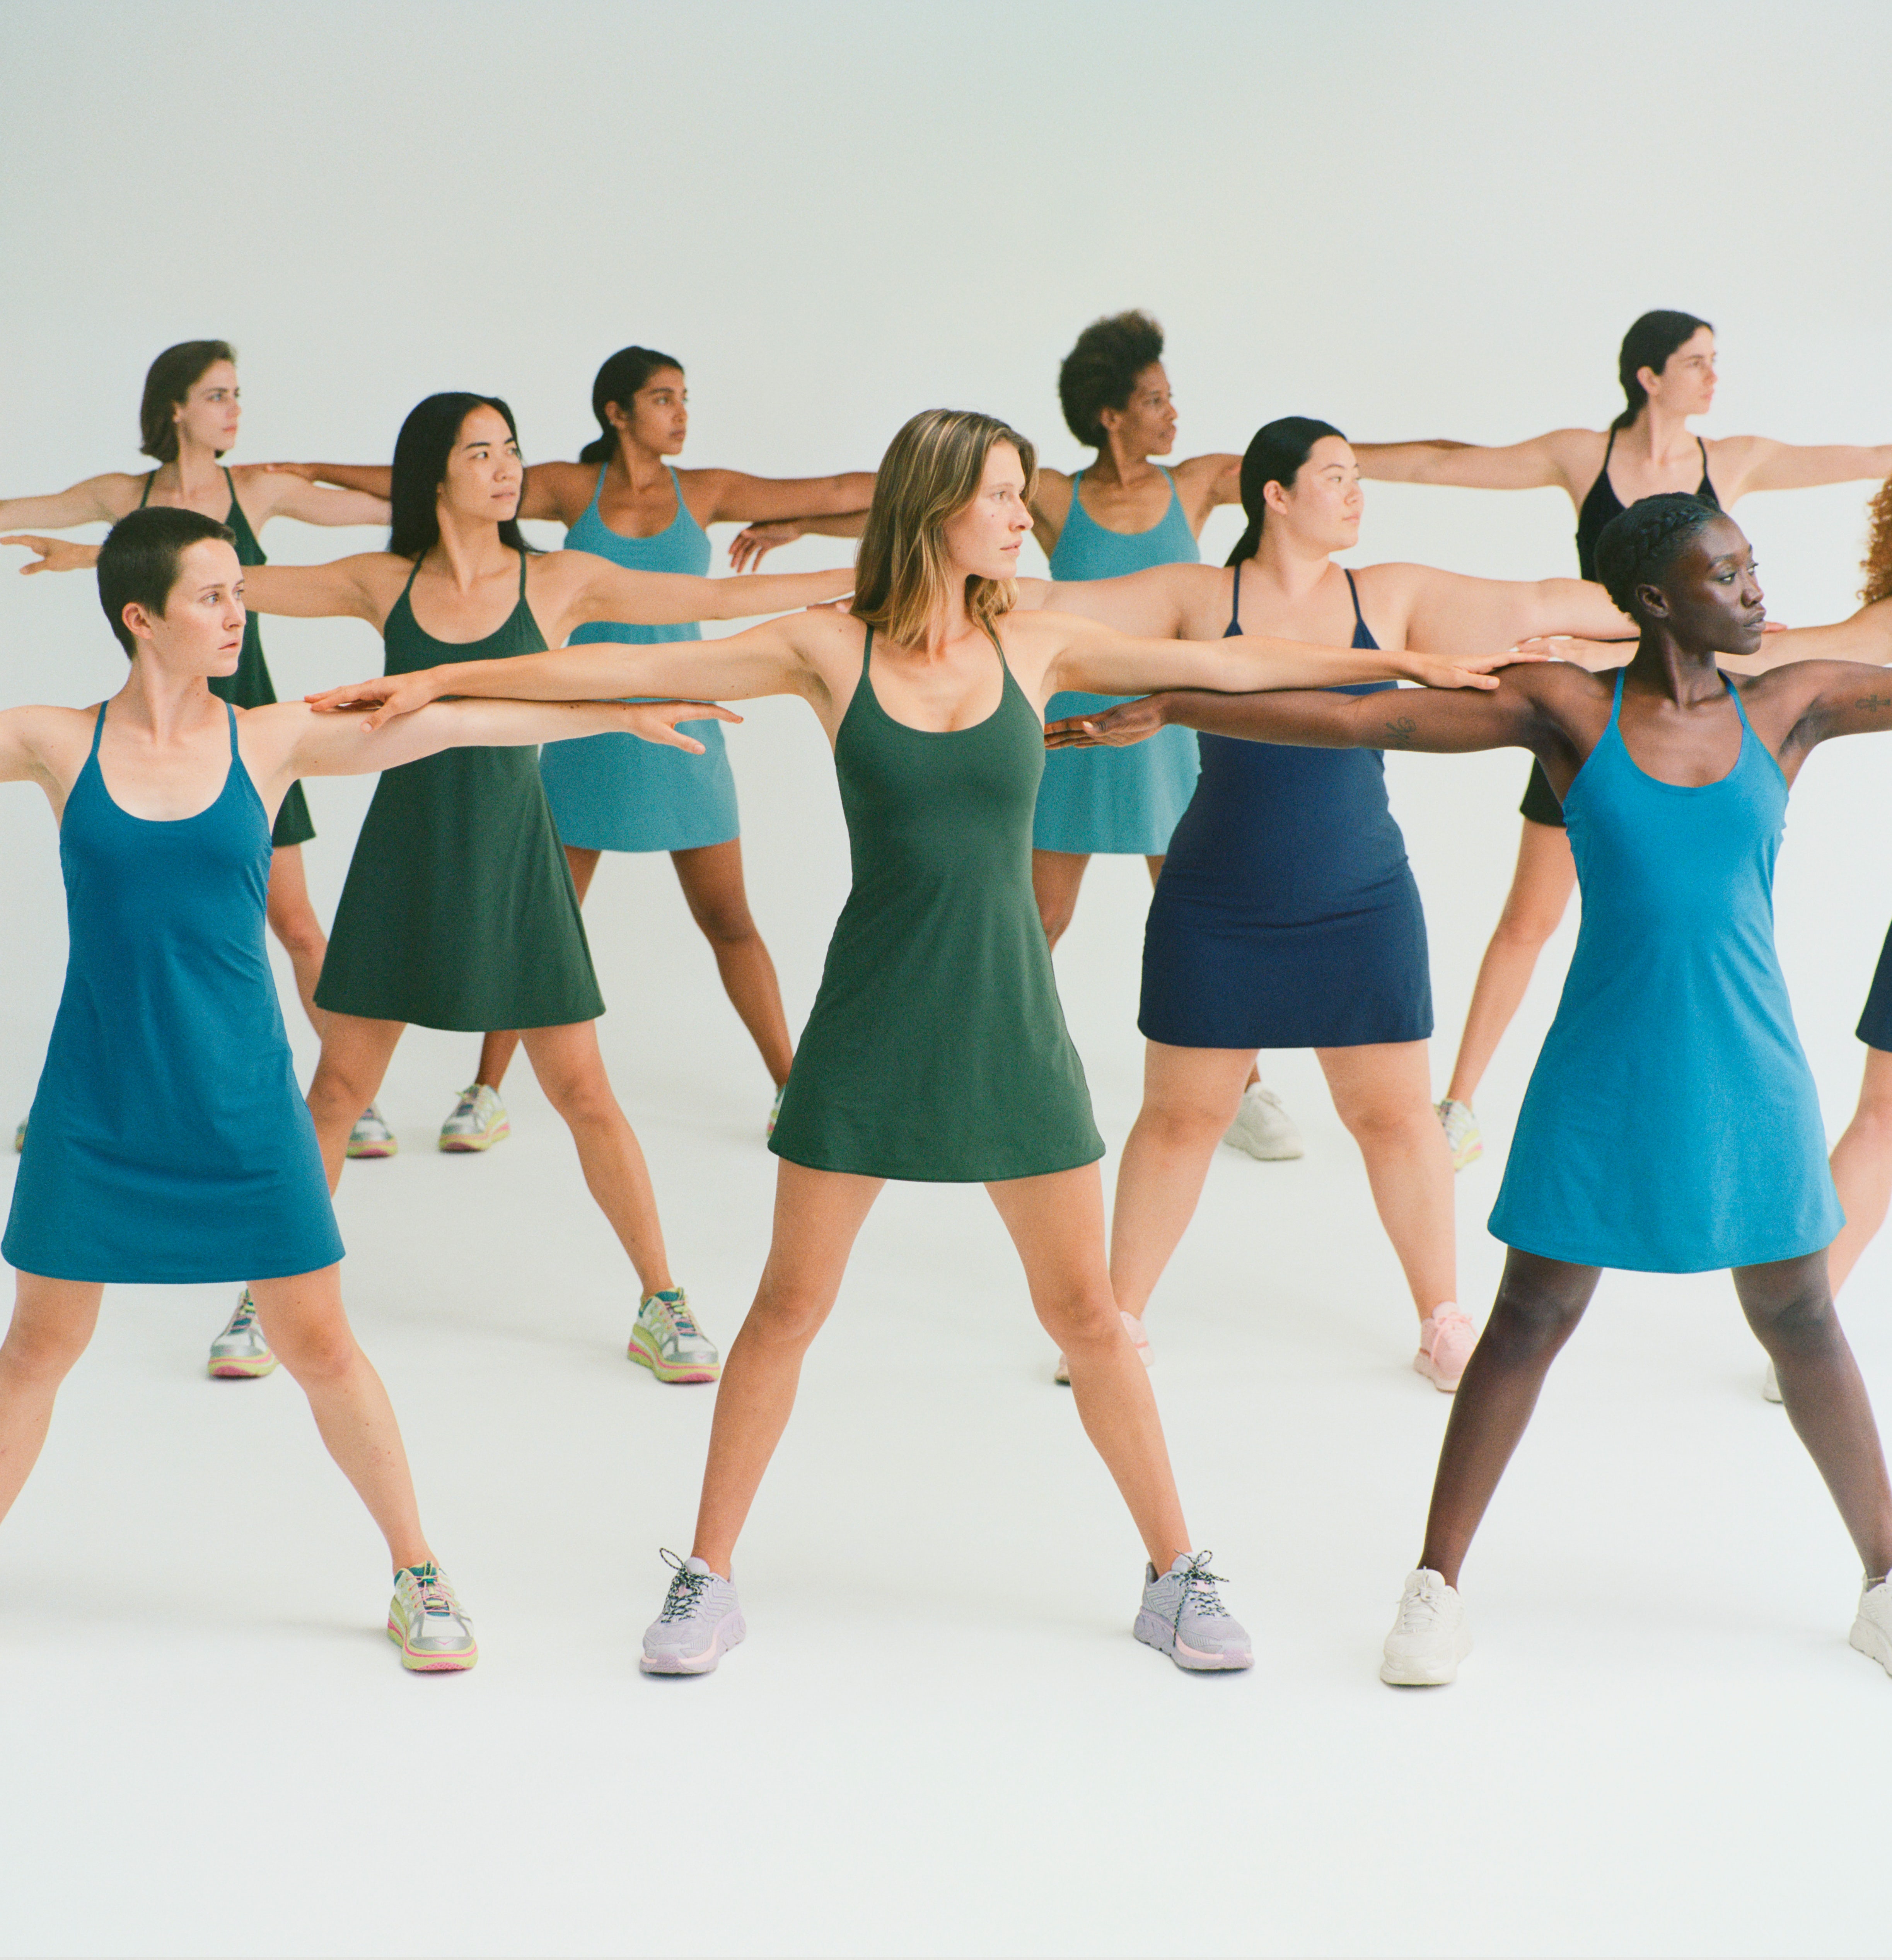 Outdoor Voices Says 'The Exercise Dress' Is a Hit. But Is it Enough?